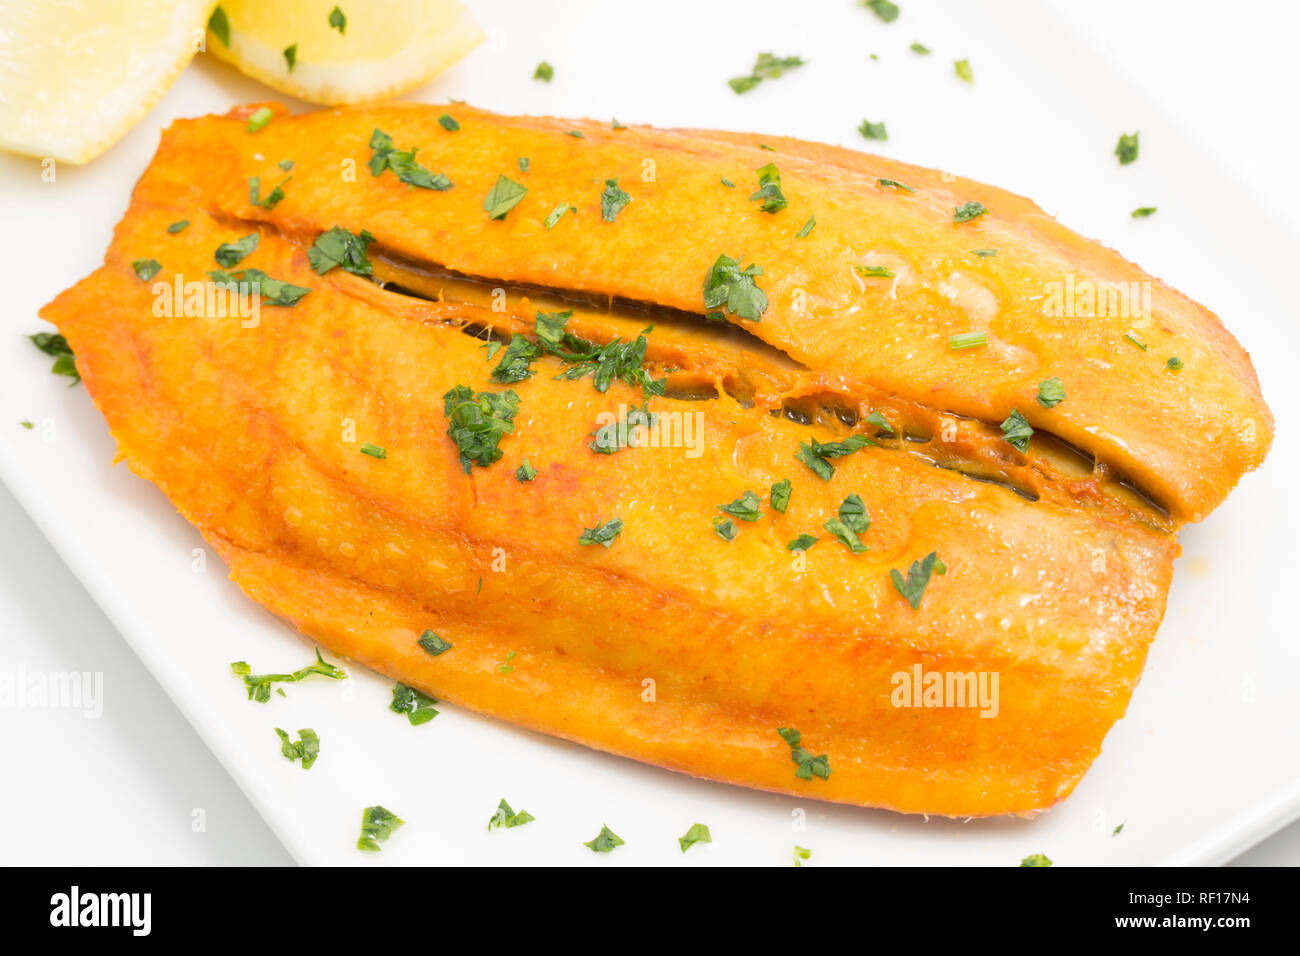 A cooked boil in the bag kipper bought from a supermarket and garnished with fresh parsley. England UK GB Stock Photo